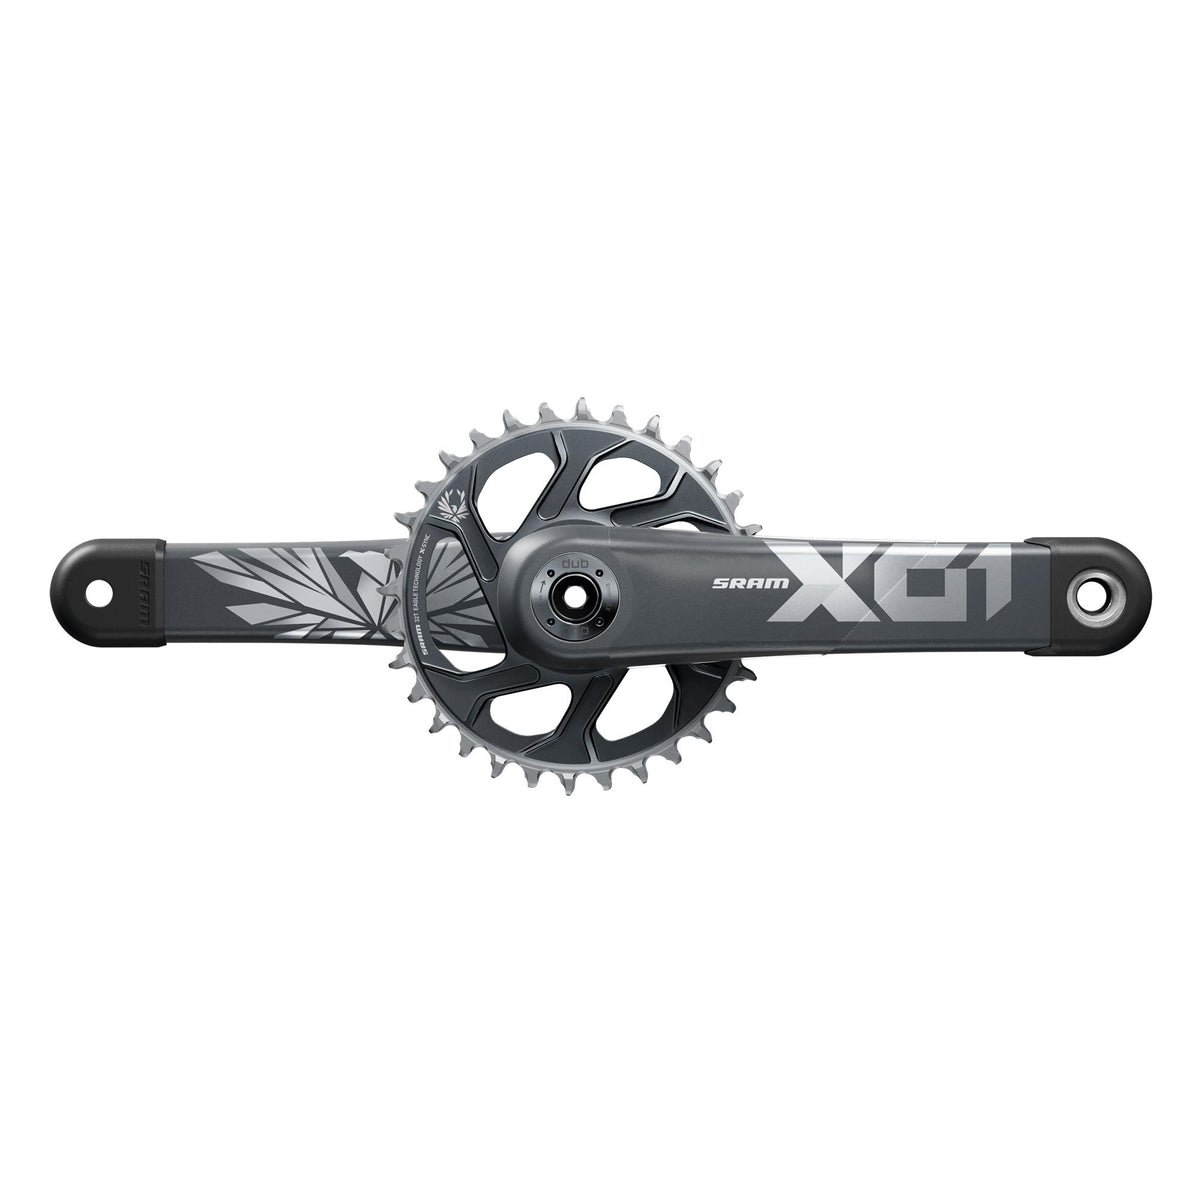 SRAM Crankset X01 Eagle Superboost+ Dub 12S With Direct Mount 32T X-Sync 2 Chainring (Dub Cups/Bearings Not Included) C2